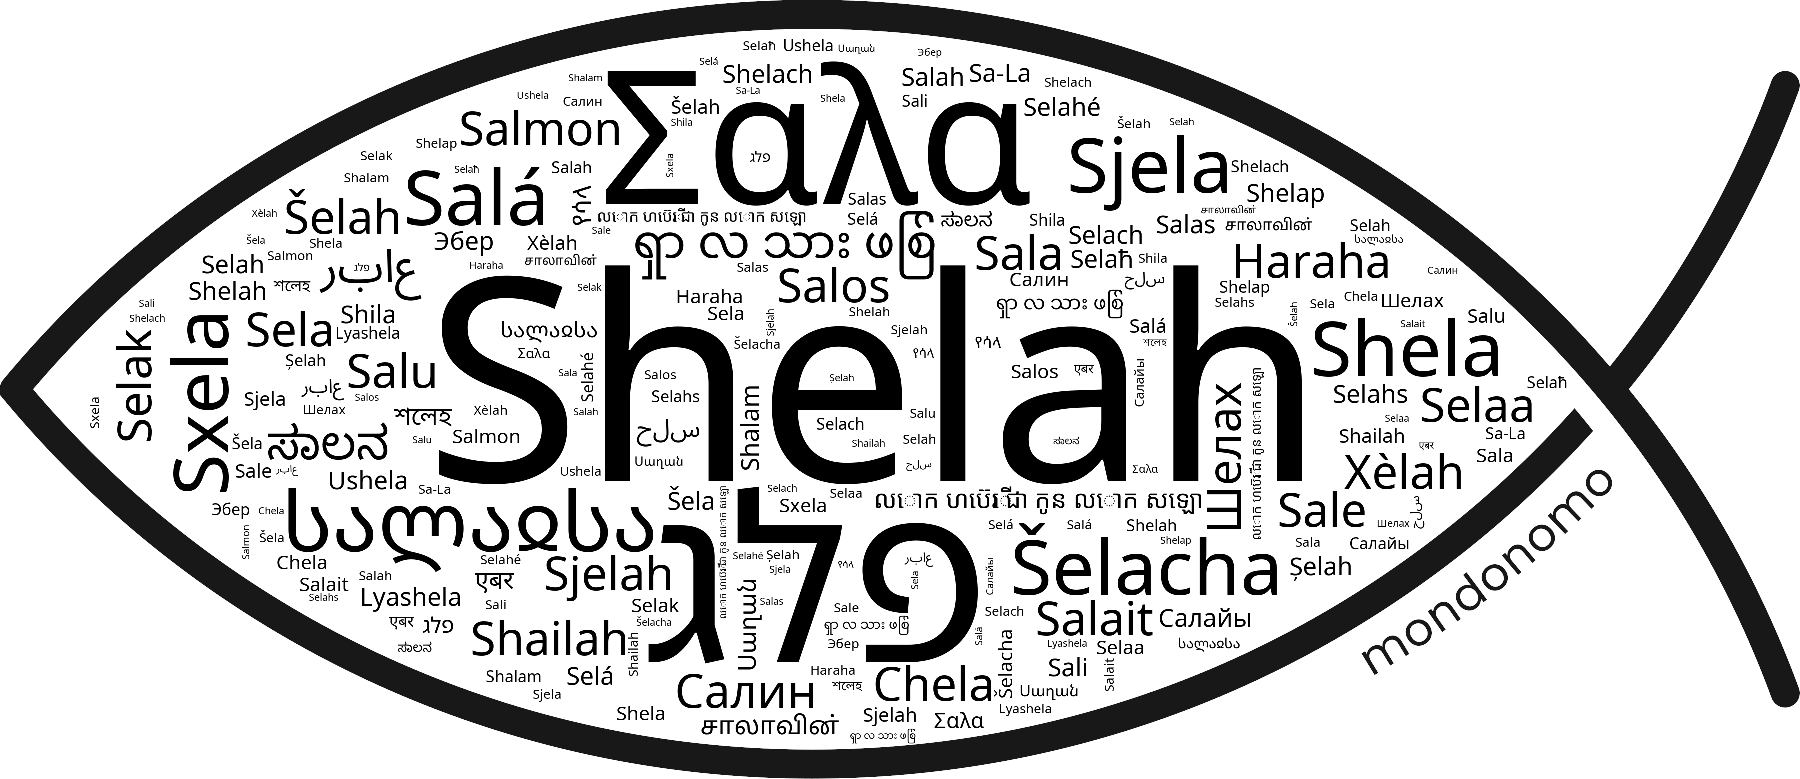 Name Shelah in the world's Bibles